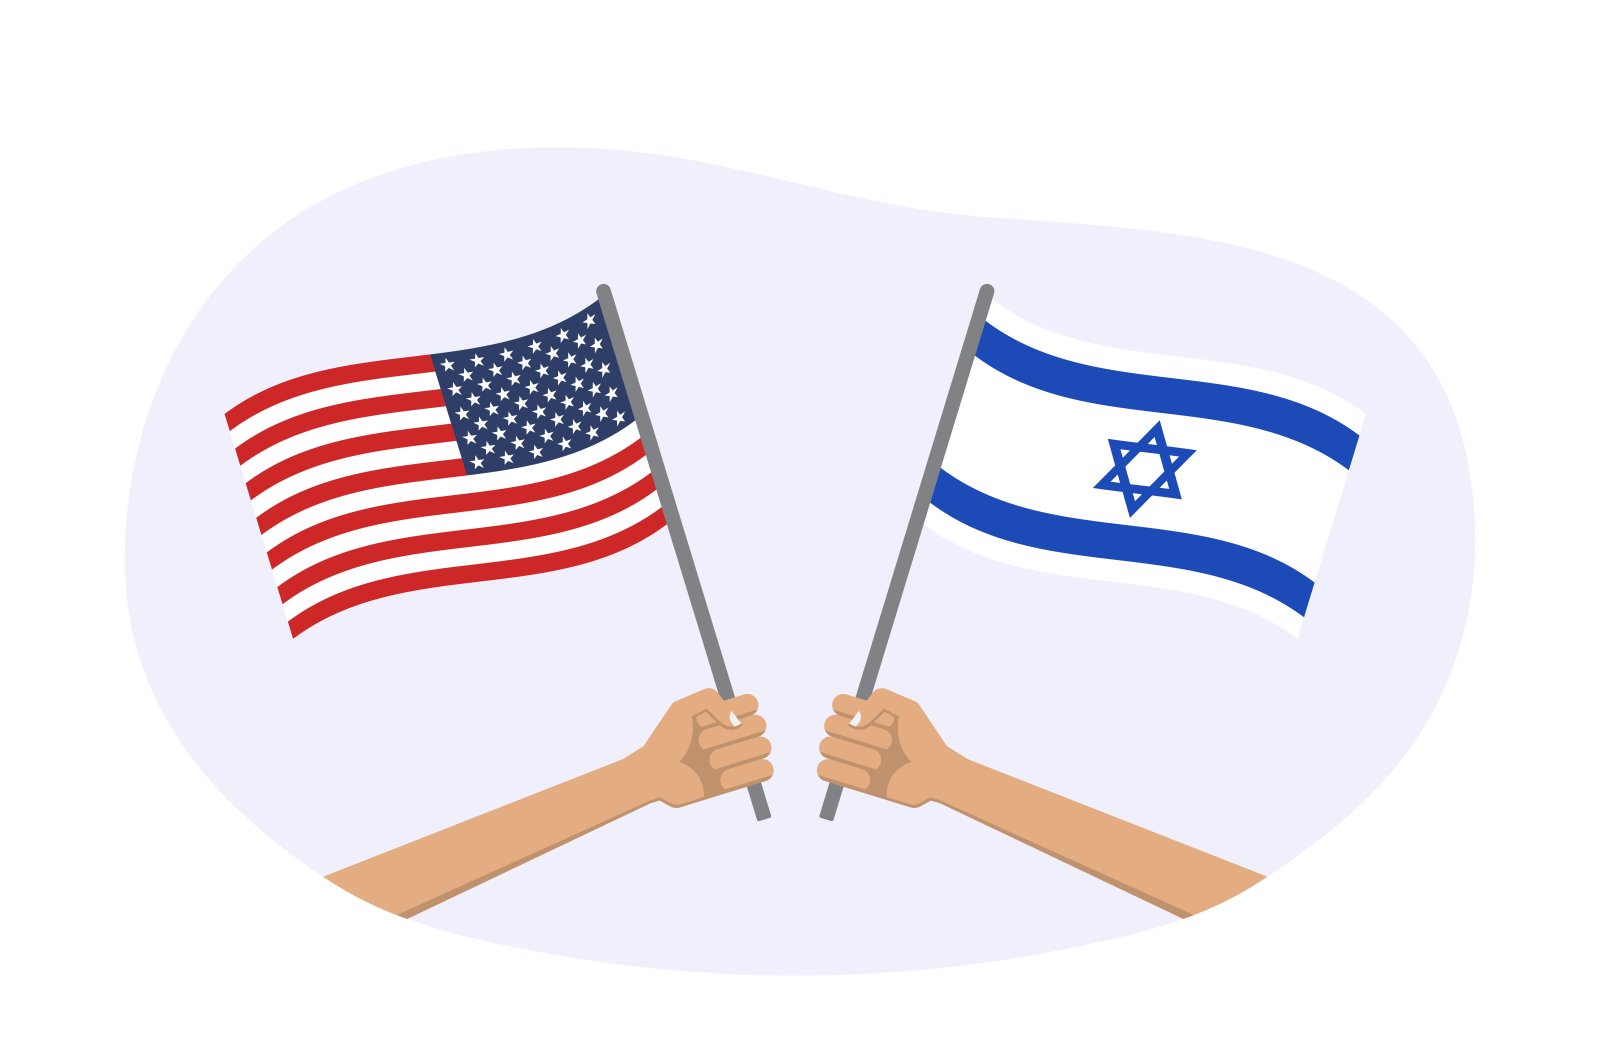 U.S. Secretary of State Antony Blinken reaffirmed the Biden administration’s commitment to a close partnership with Israel besides underscoring its continued desire for a two-state solution to the Israeli-Palestinian conflict. (Shutterstock Photo)